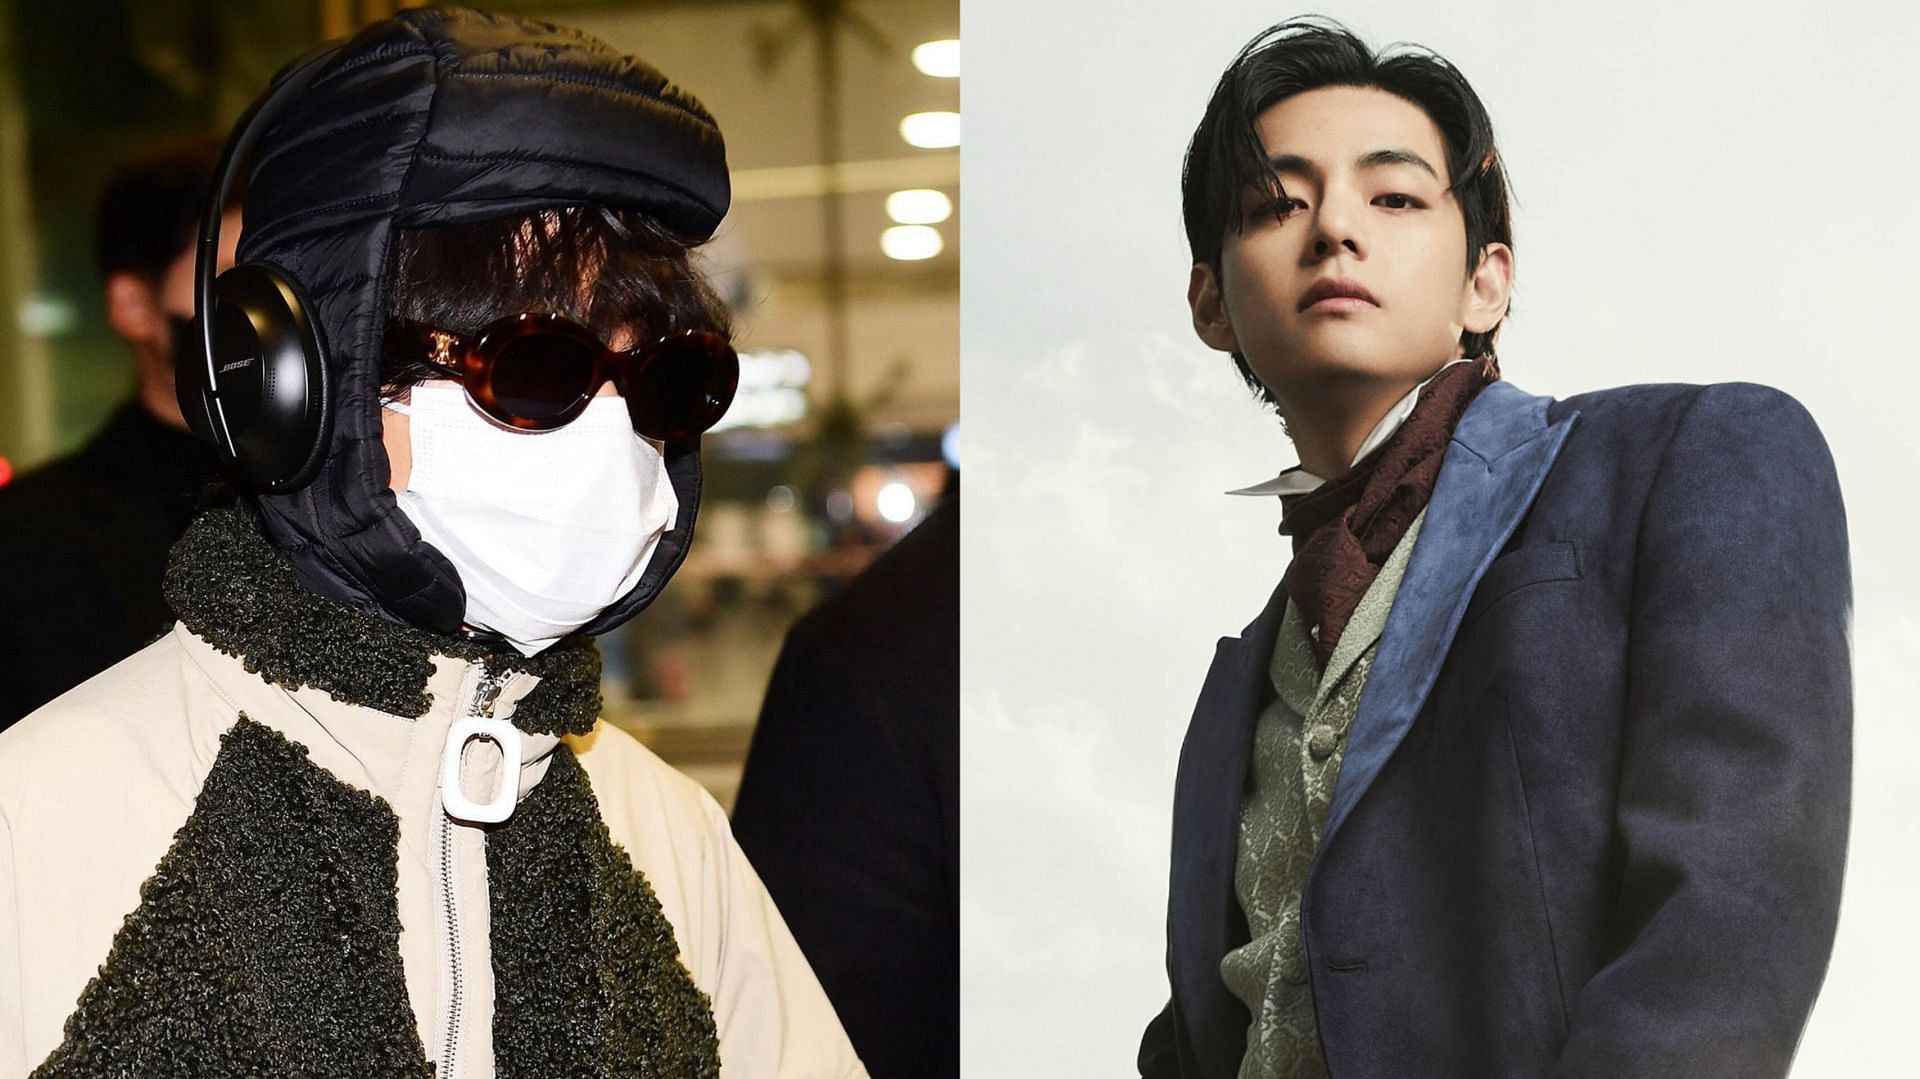 BTS's V (Kim Taehyung) turns heads at the airport with his oversized bag  upon returning to South Korea